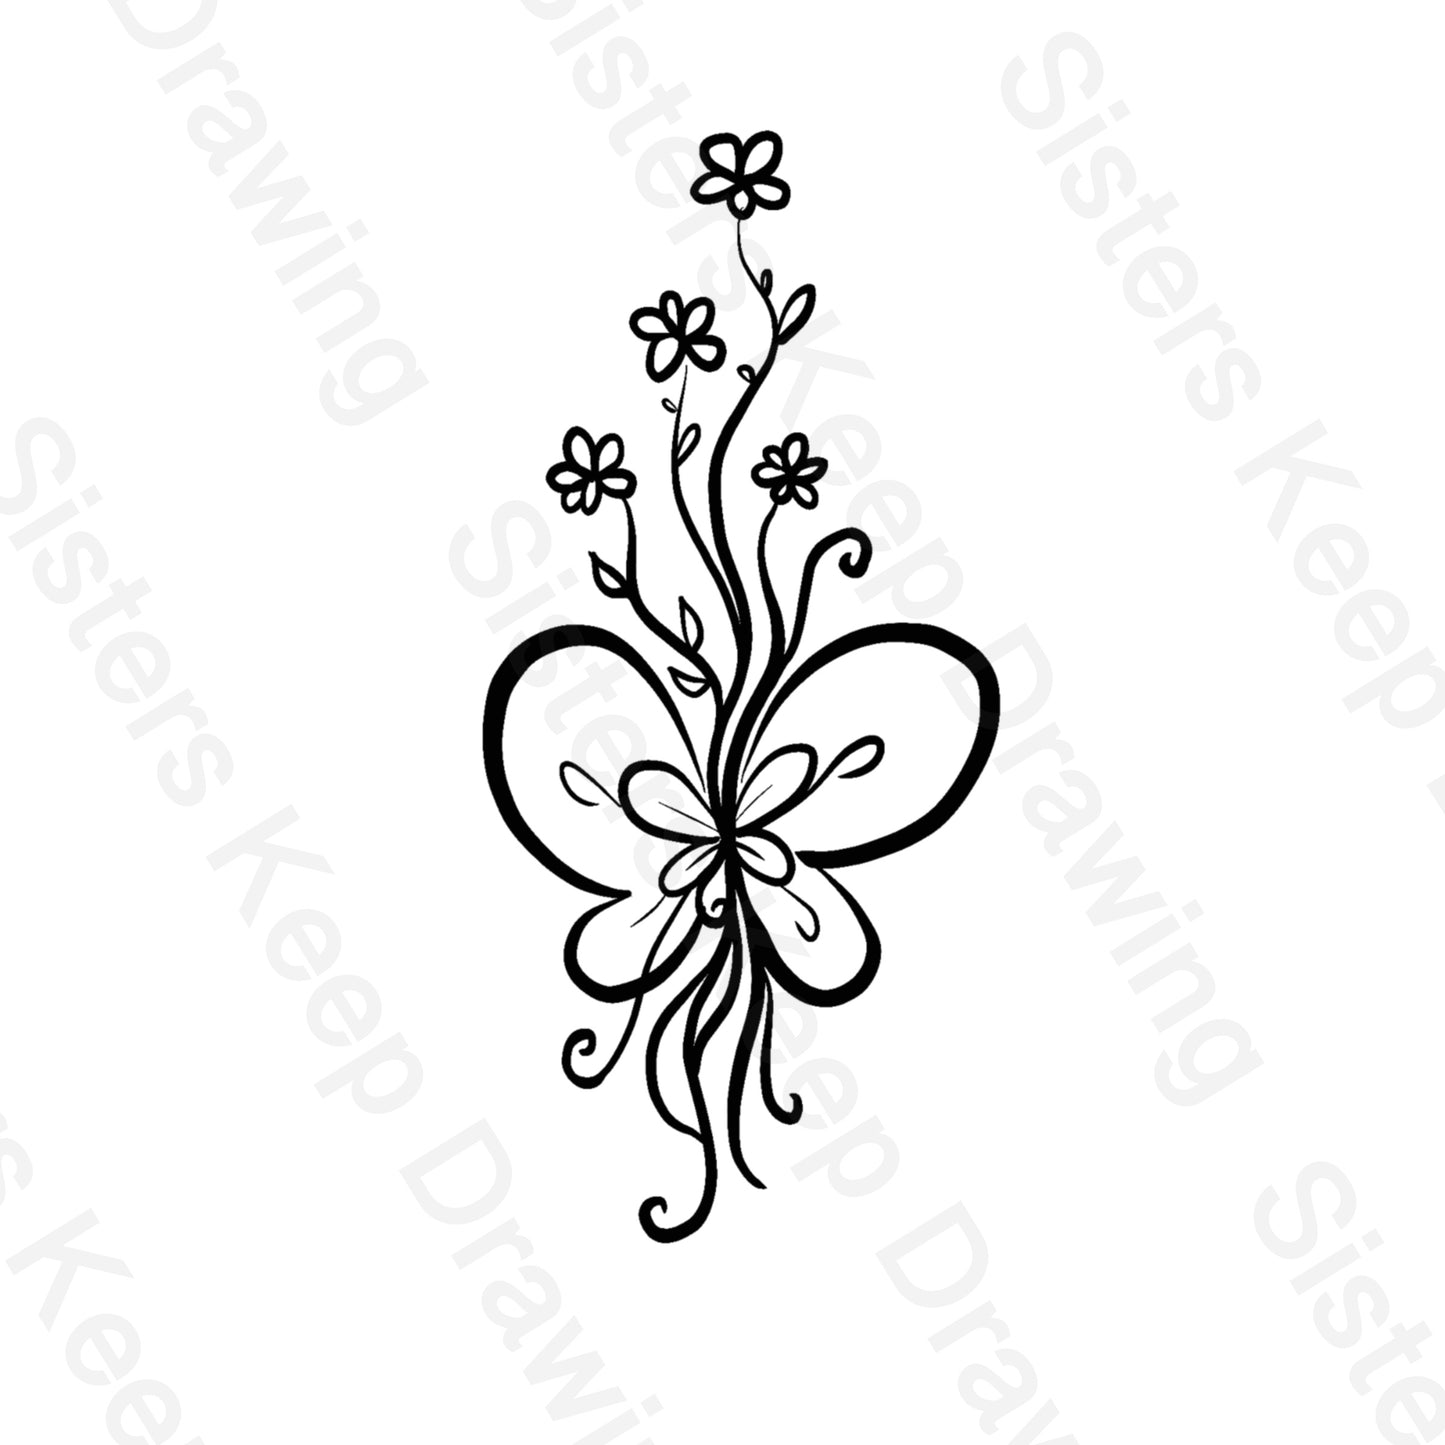 Amy’s Fairy Wings Little Women Tattoo Transparent Permission PNG- instant download digital printable artwork